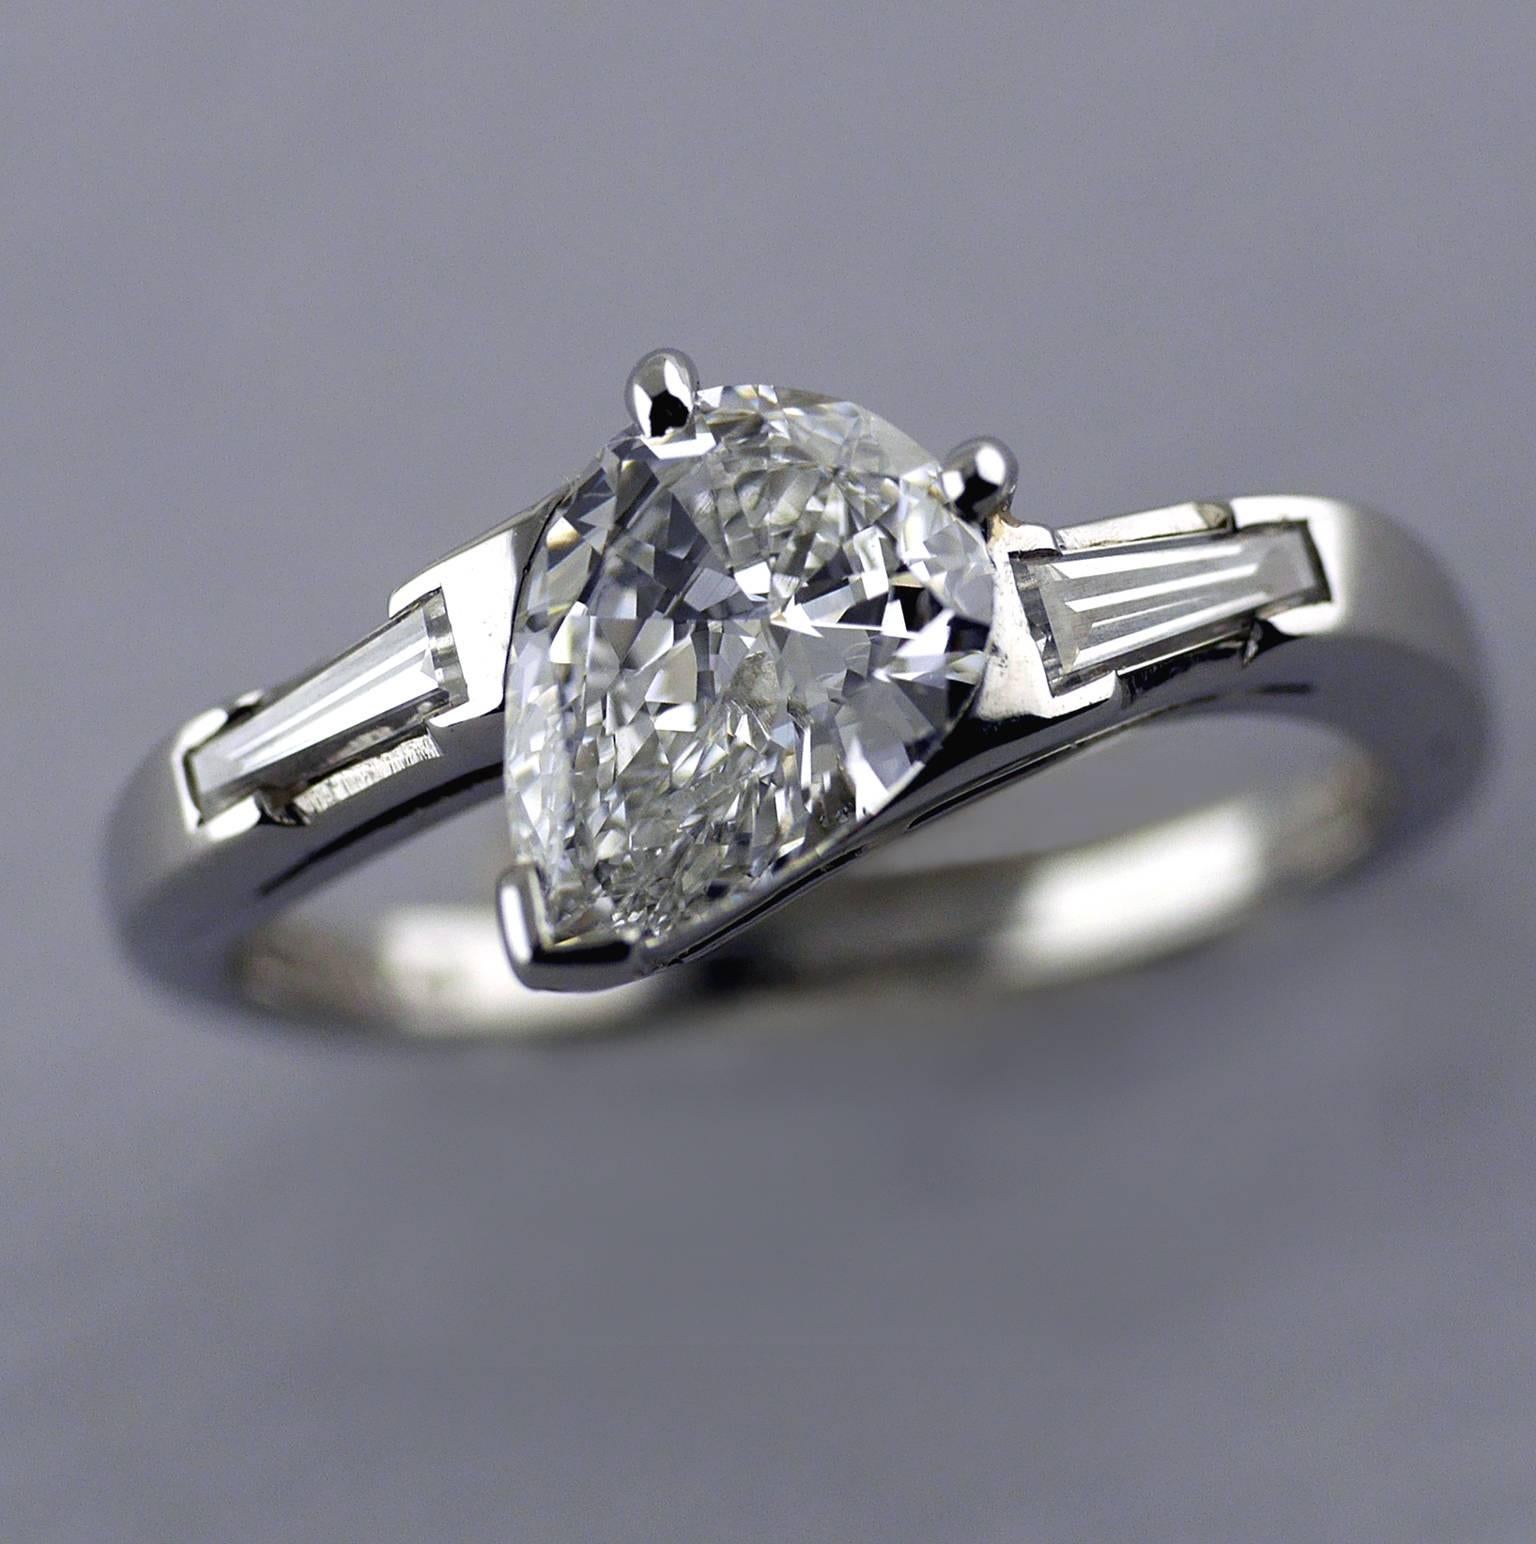 Platinum Pear Shape Diamond ring circa 1960.

1.01ct Pear shape diamond, D, Vvs2, set in a platinum shank. With two tapered baguette diamonds on the shoulders of approx 0.30ct F/G, Vs1 (total weight). International Gemmological Report